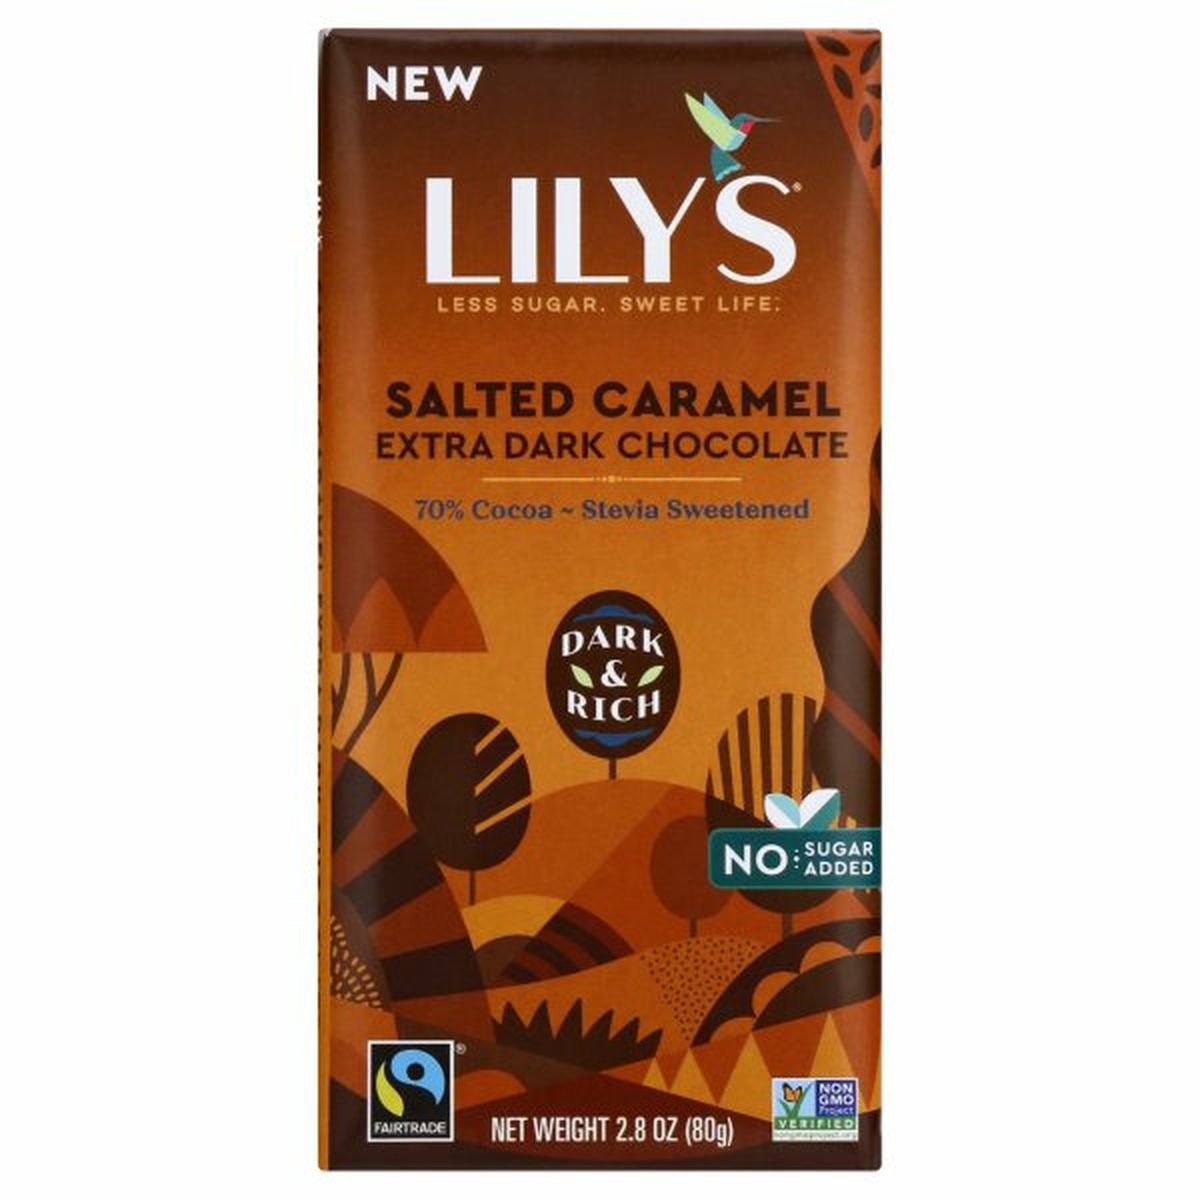 Calories in Lily's Chocolate, Extra Dark, Salted Caramel, 70% Cocoa